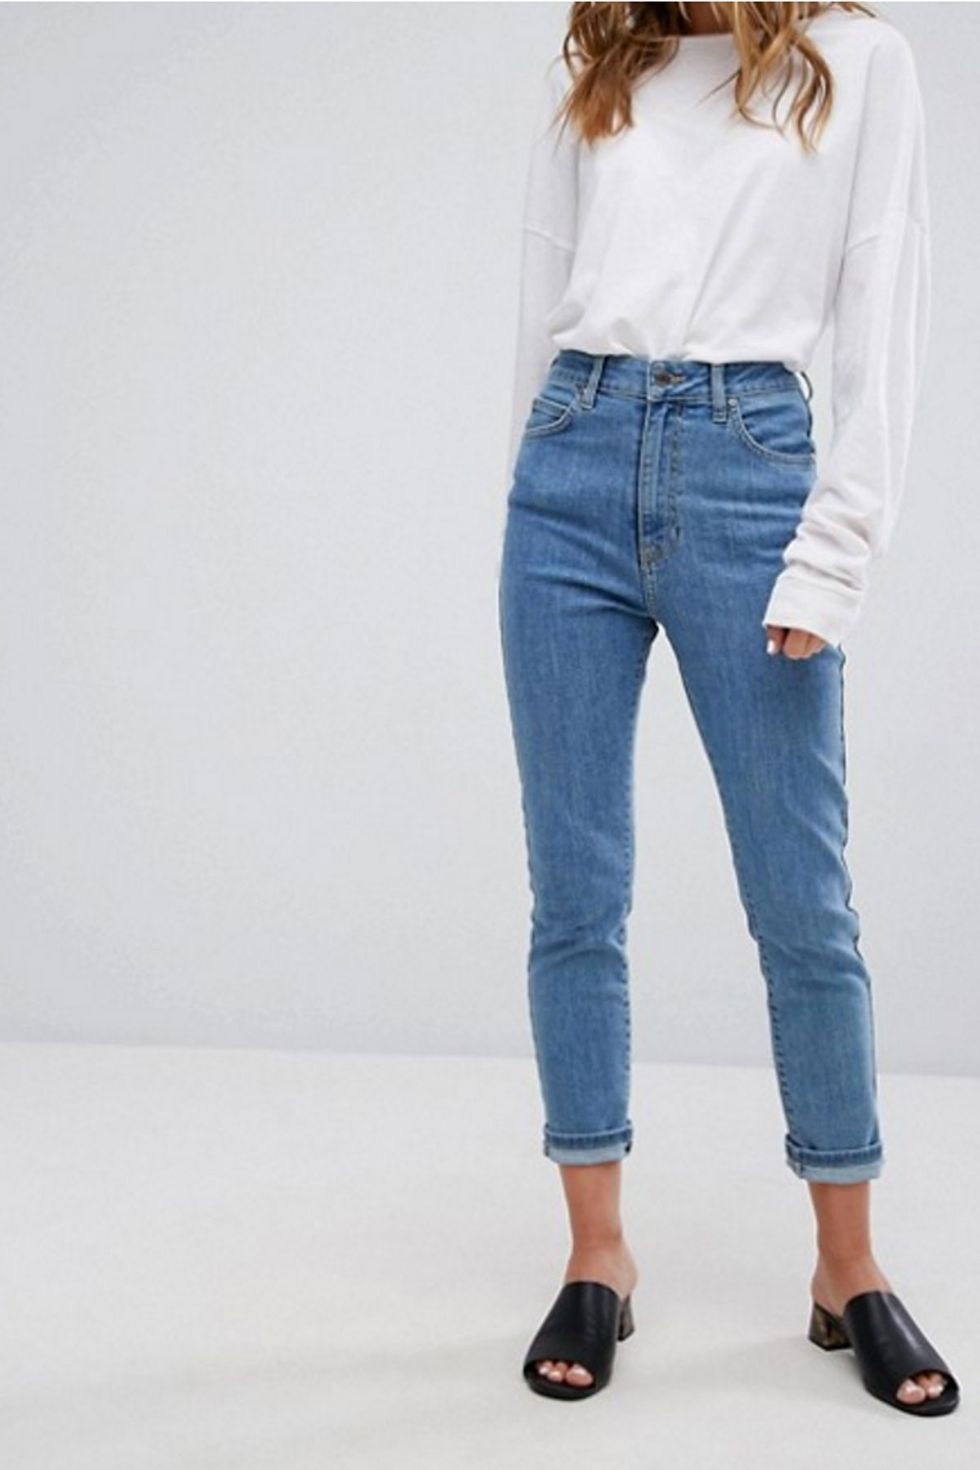 Mom Jeans Are Making a Comeback - Mom Jeans Trend